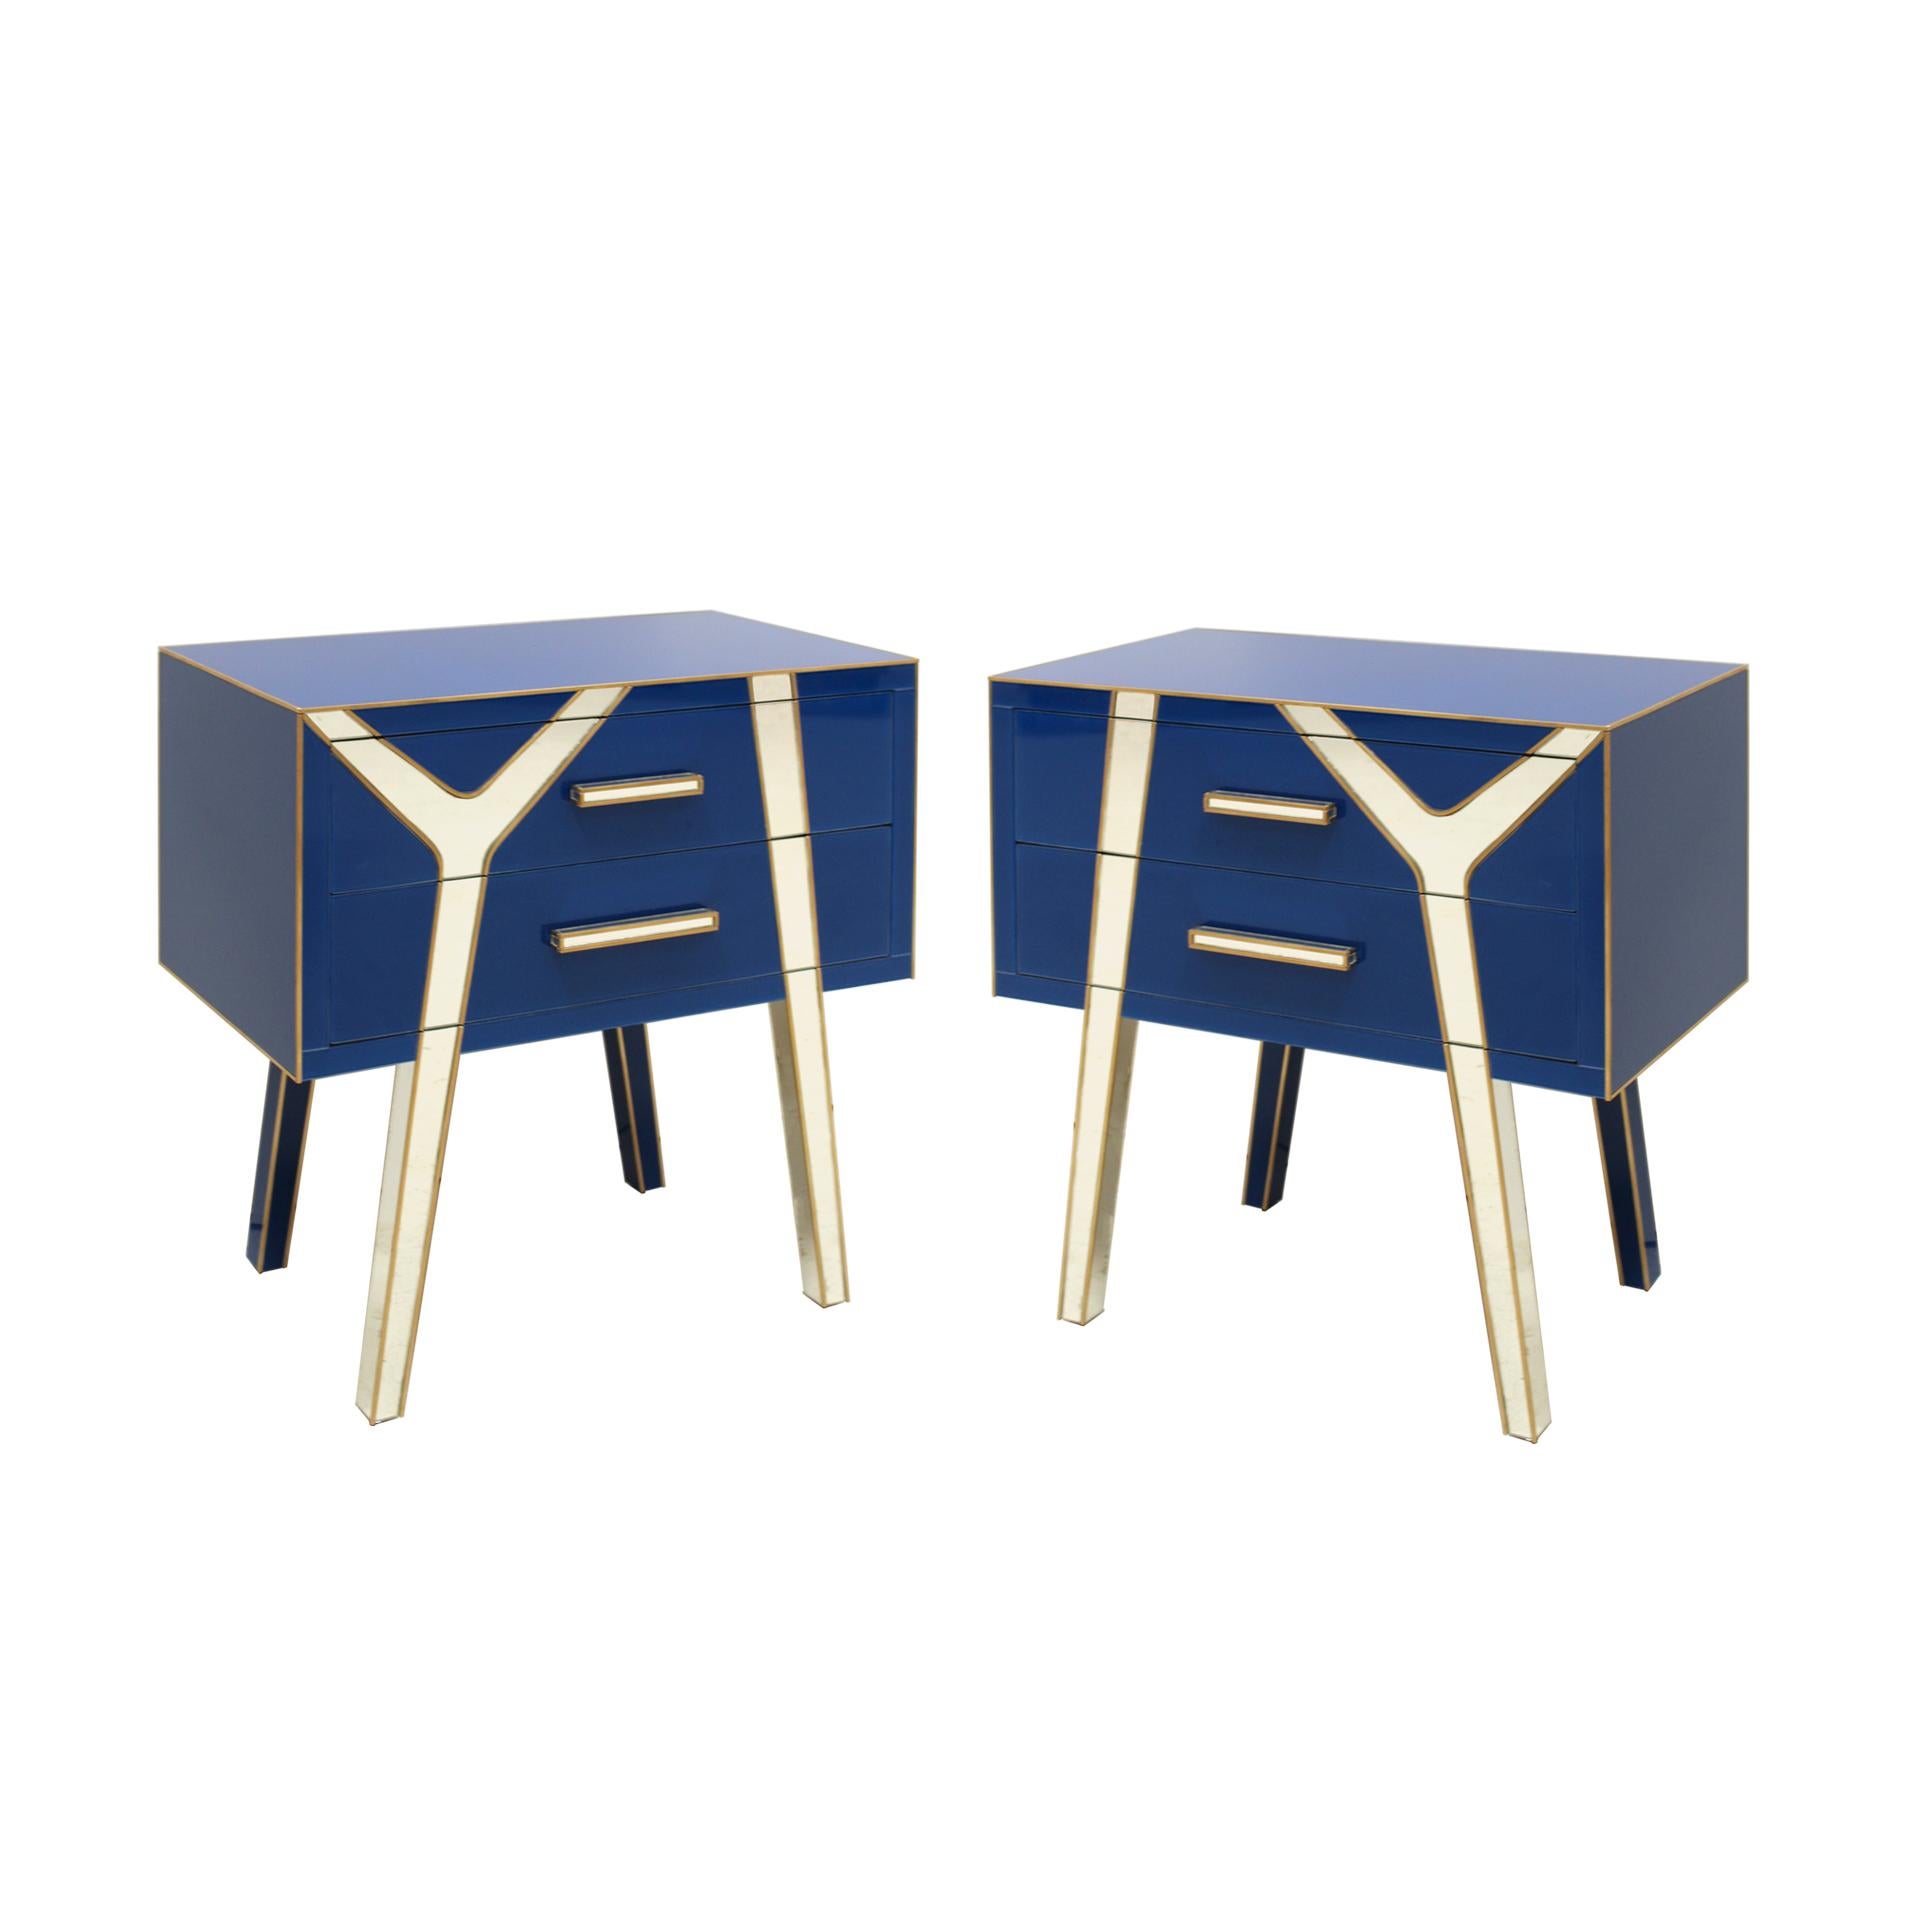 An elegant pair of bedside tables designed and produced by L.A Studio Interiorismo. Structure made of solid wood claded in blue and mirror glass with brass details. Composed of two drawers and asymmetric legs.
silver glass color and brass finials